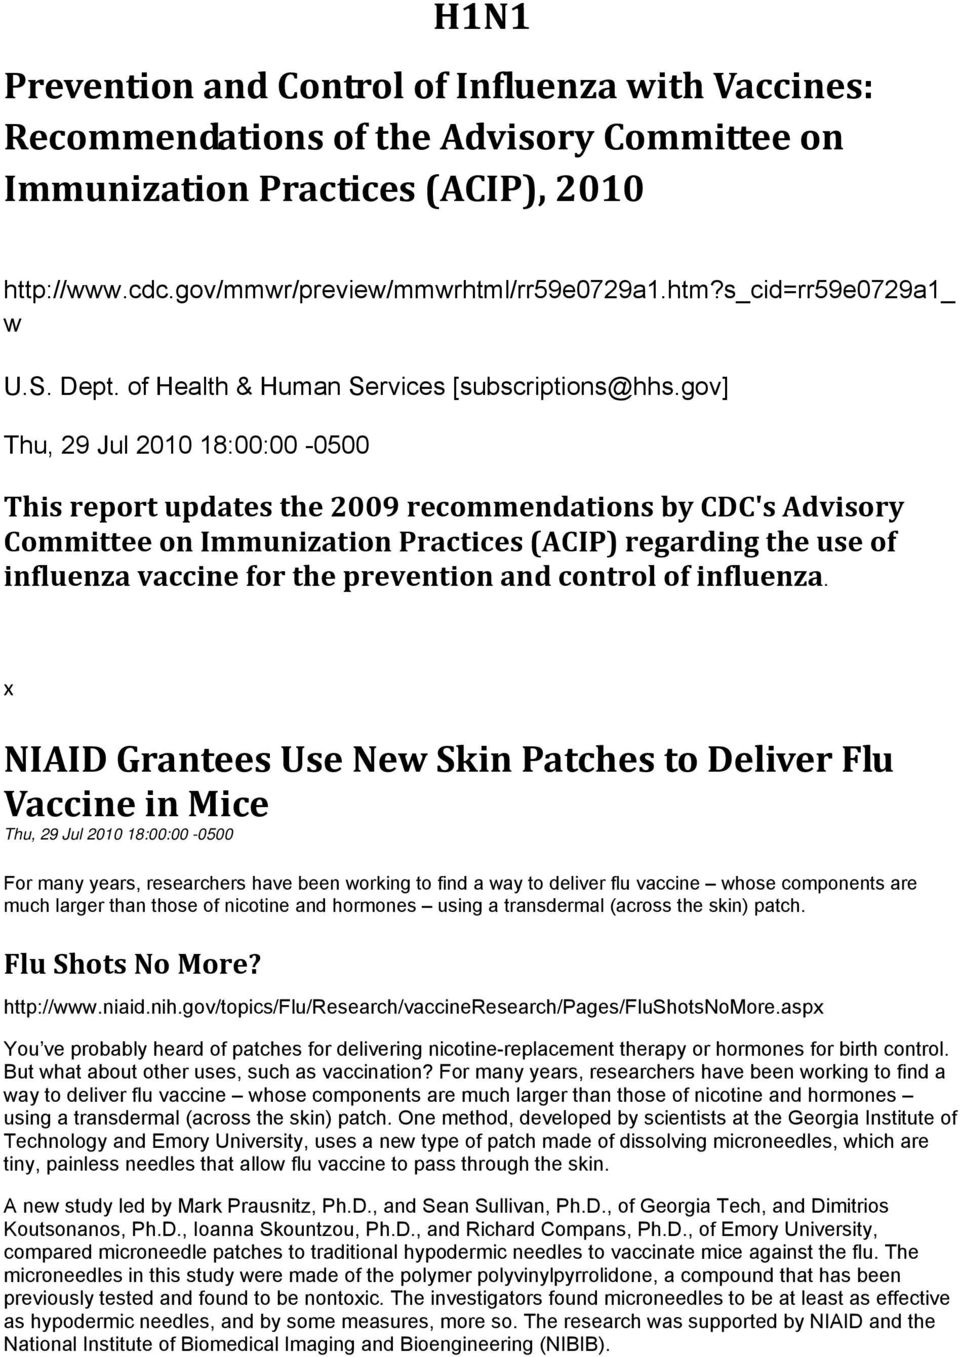 gov] Thu, 29 Jul 2010 18:00:00-0500 This report updates the 2009 recommendations by CDC's Advisory Committee on Immunization Practices (ACIP) regarding the use of influenza vaccine for the prevention